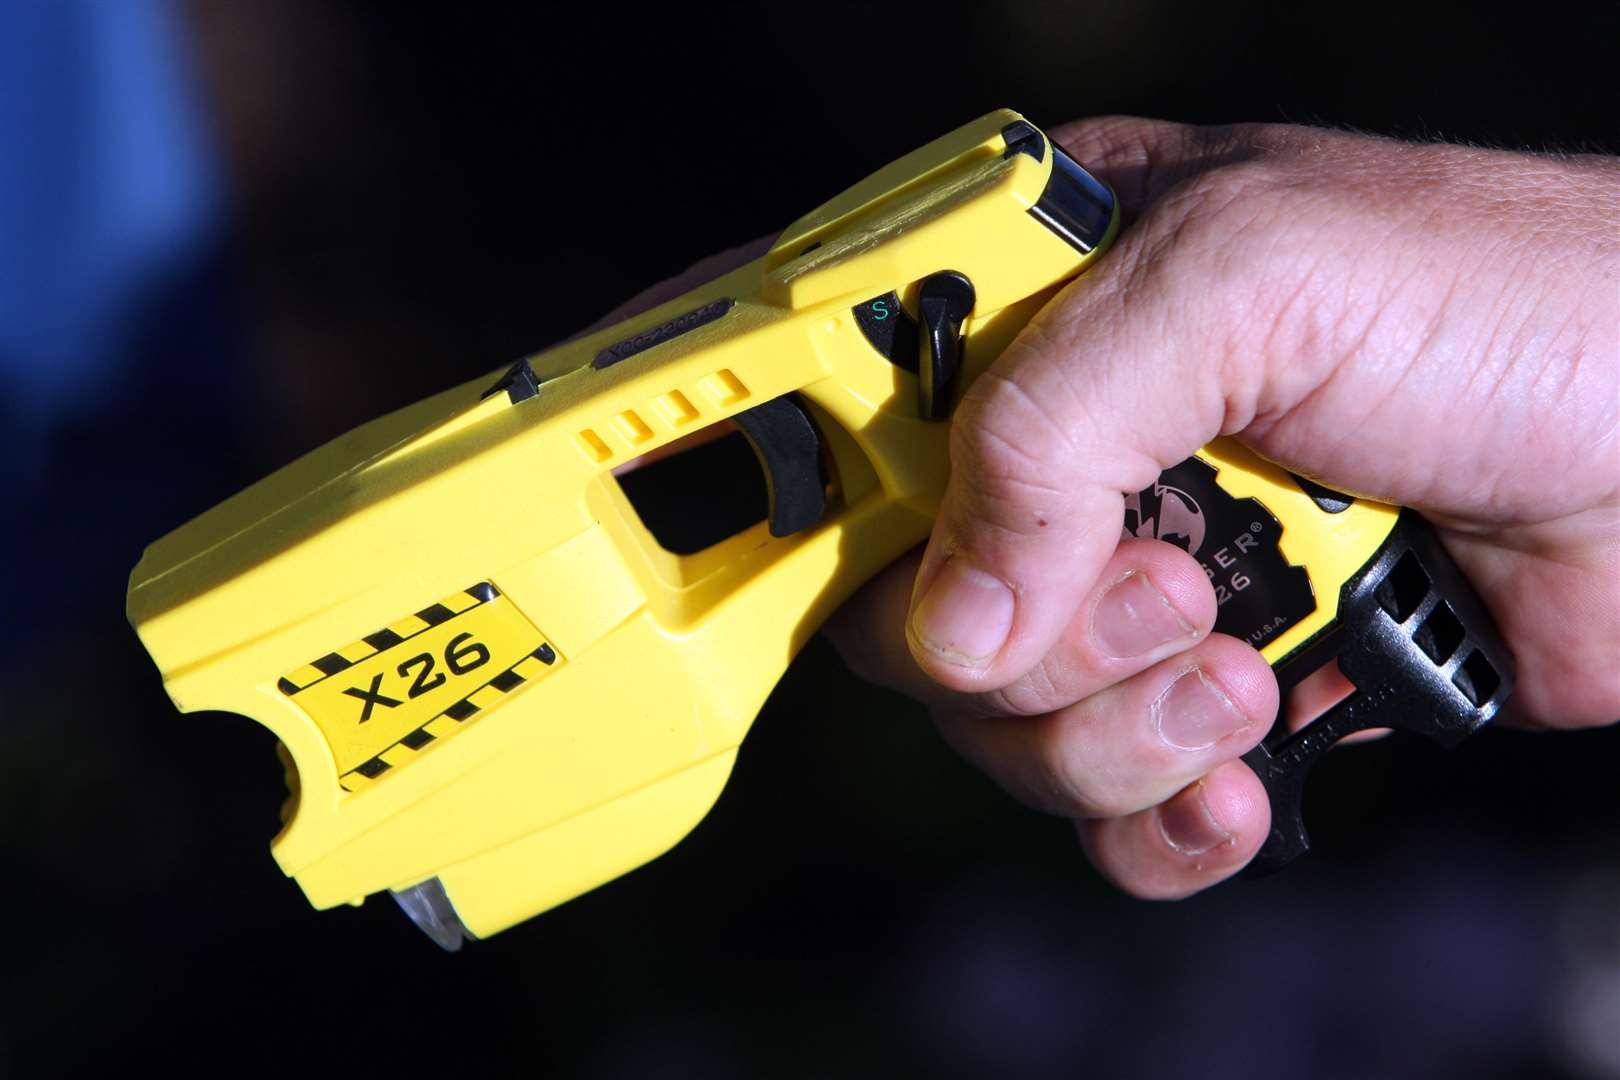 Police have used a Taser on 35 occasions